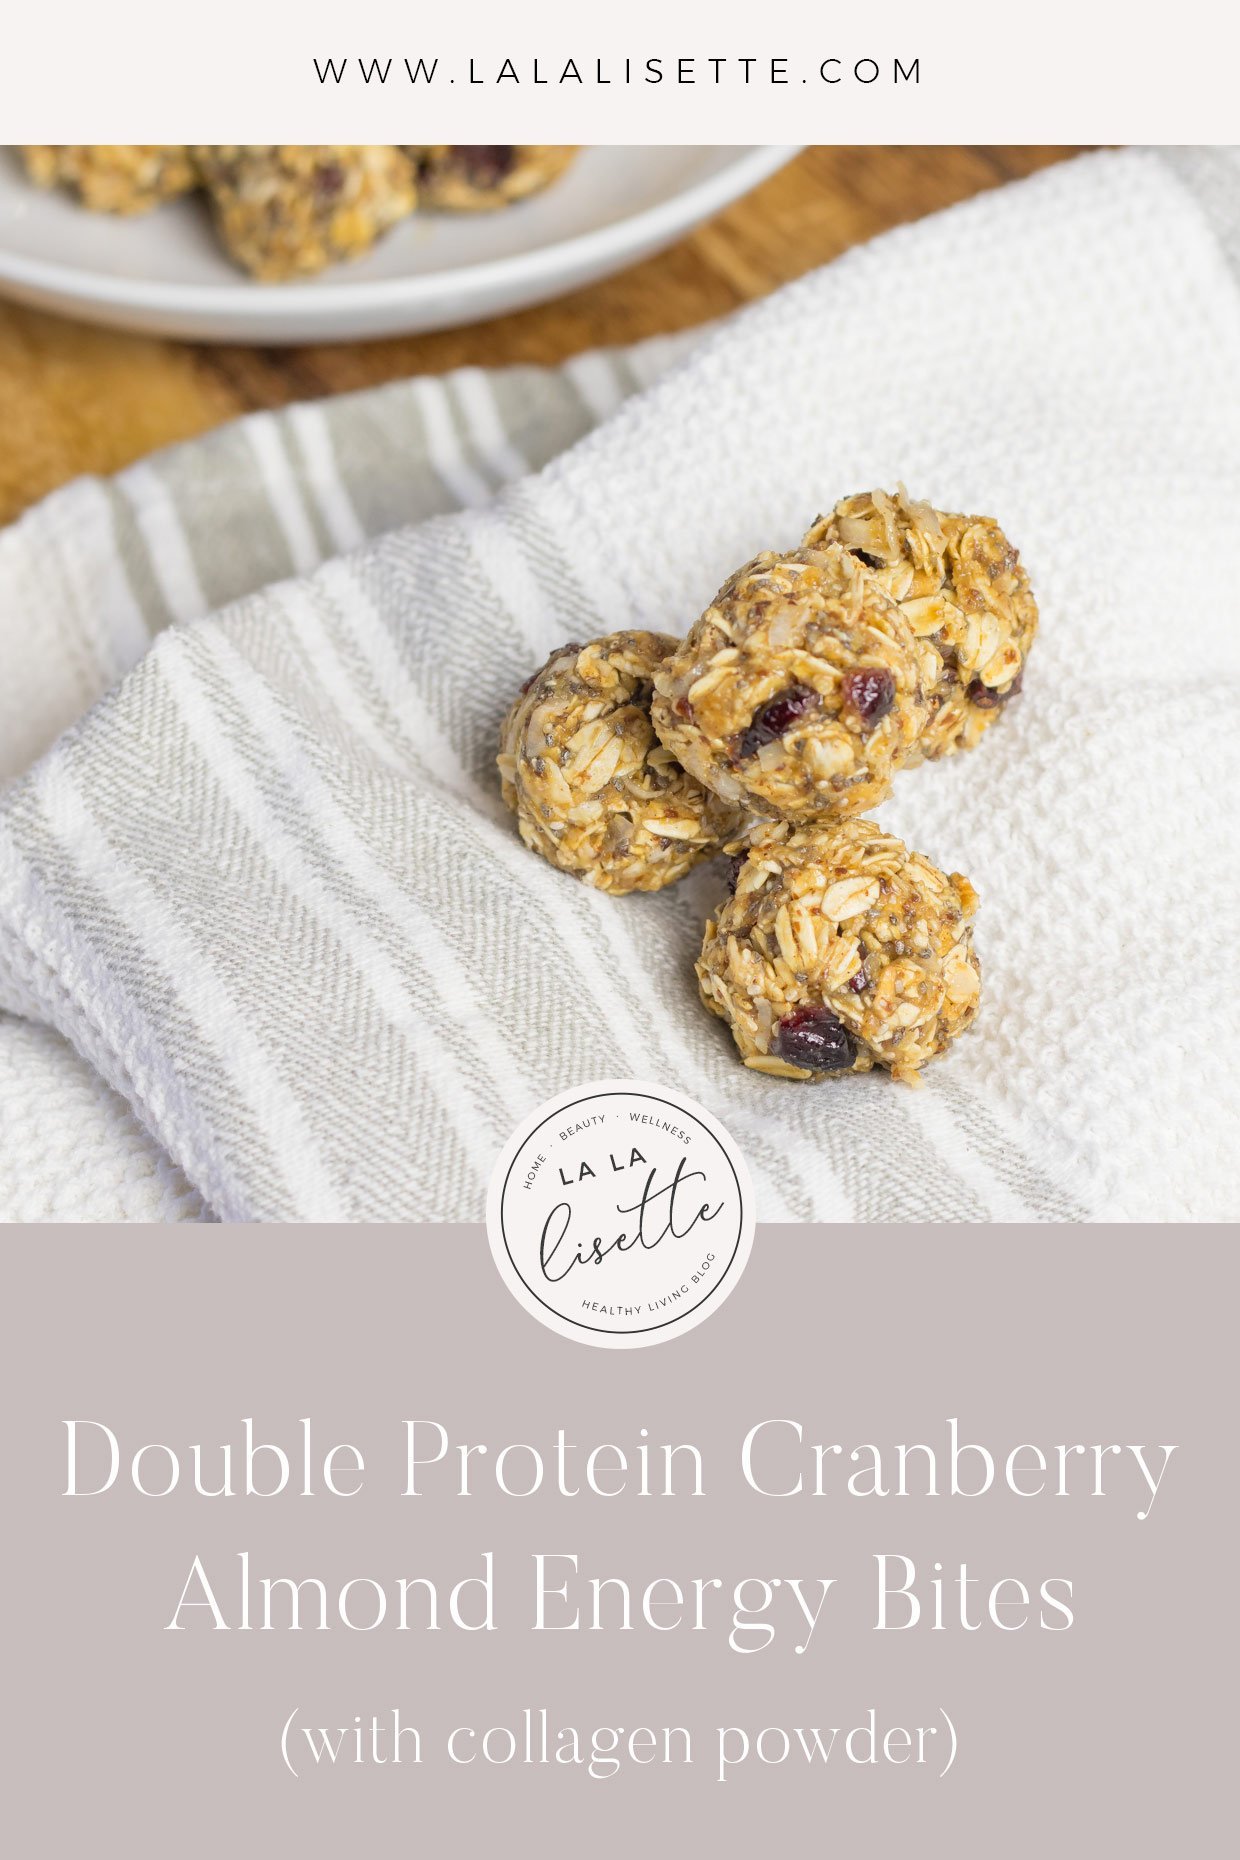 graphic of protein balls with text: Double Protein Cranberry Almond Bites